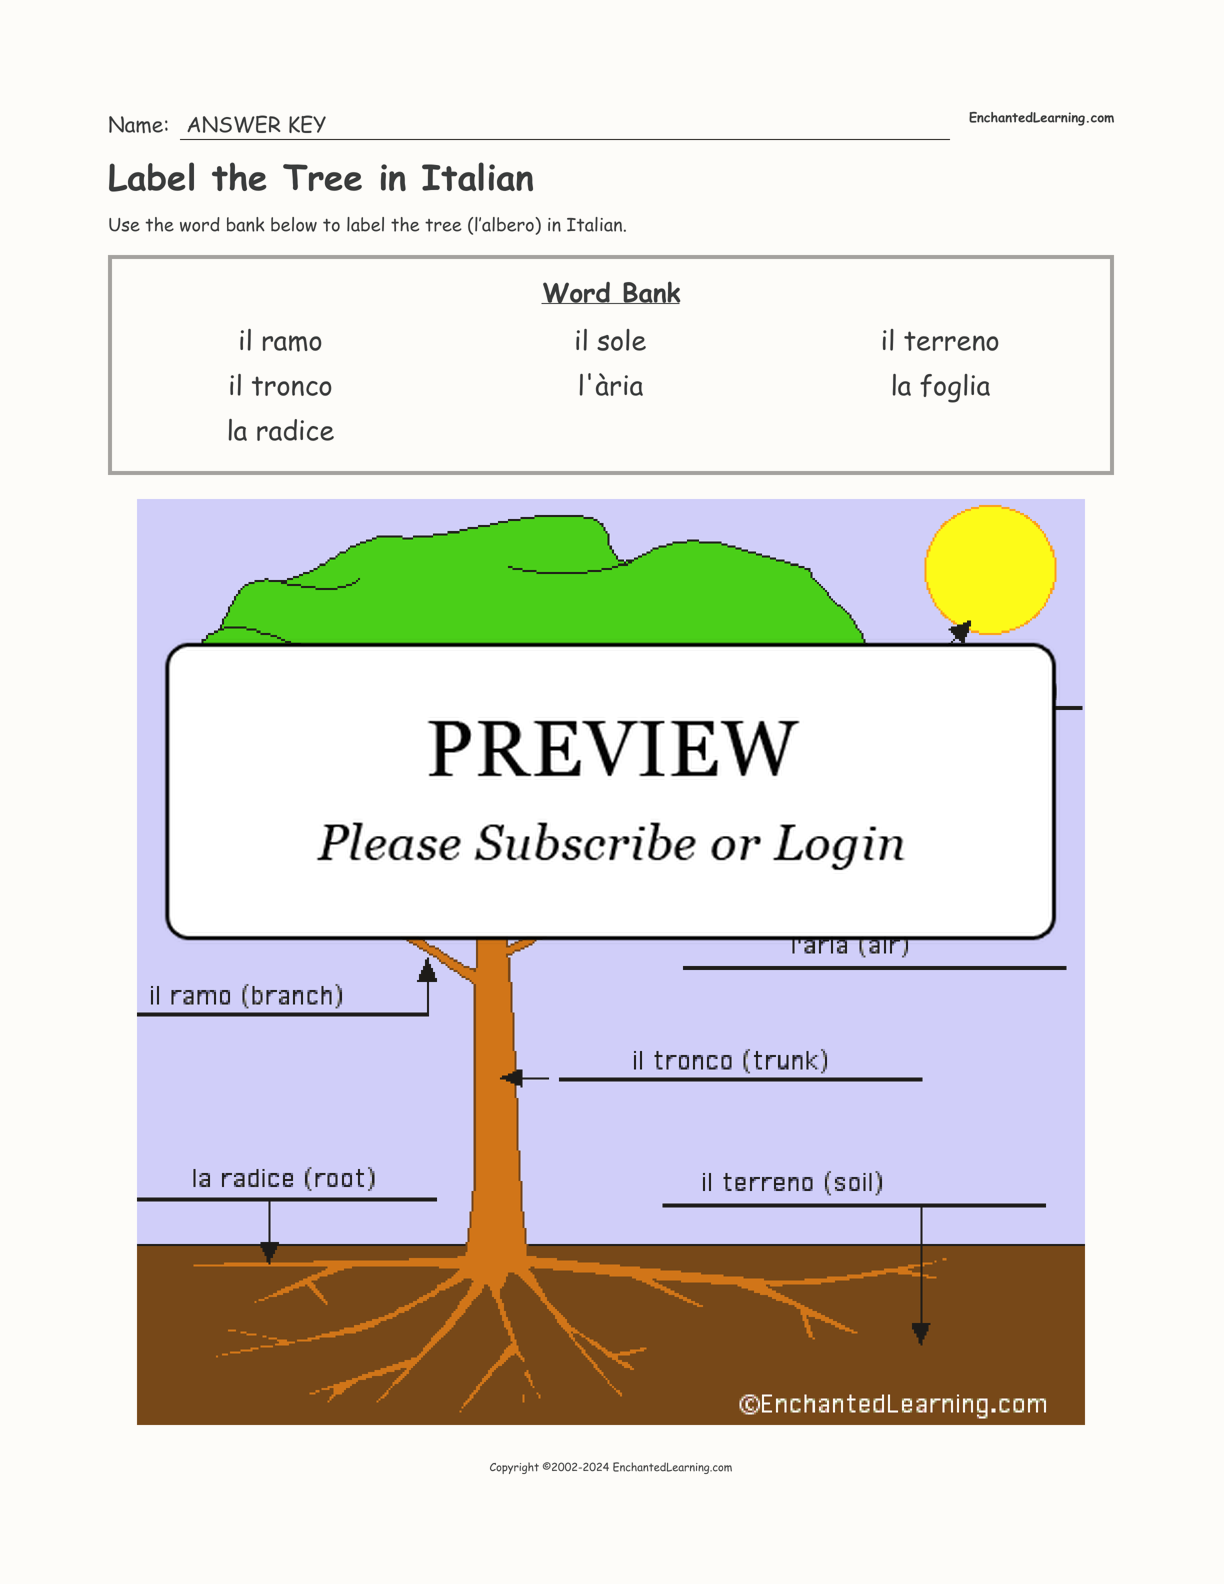 Label the Tree in Italian interactive worksheet page 2